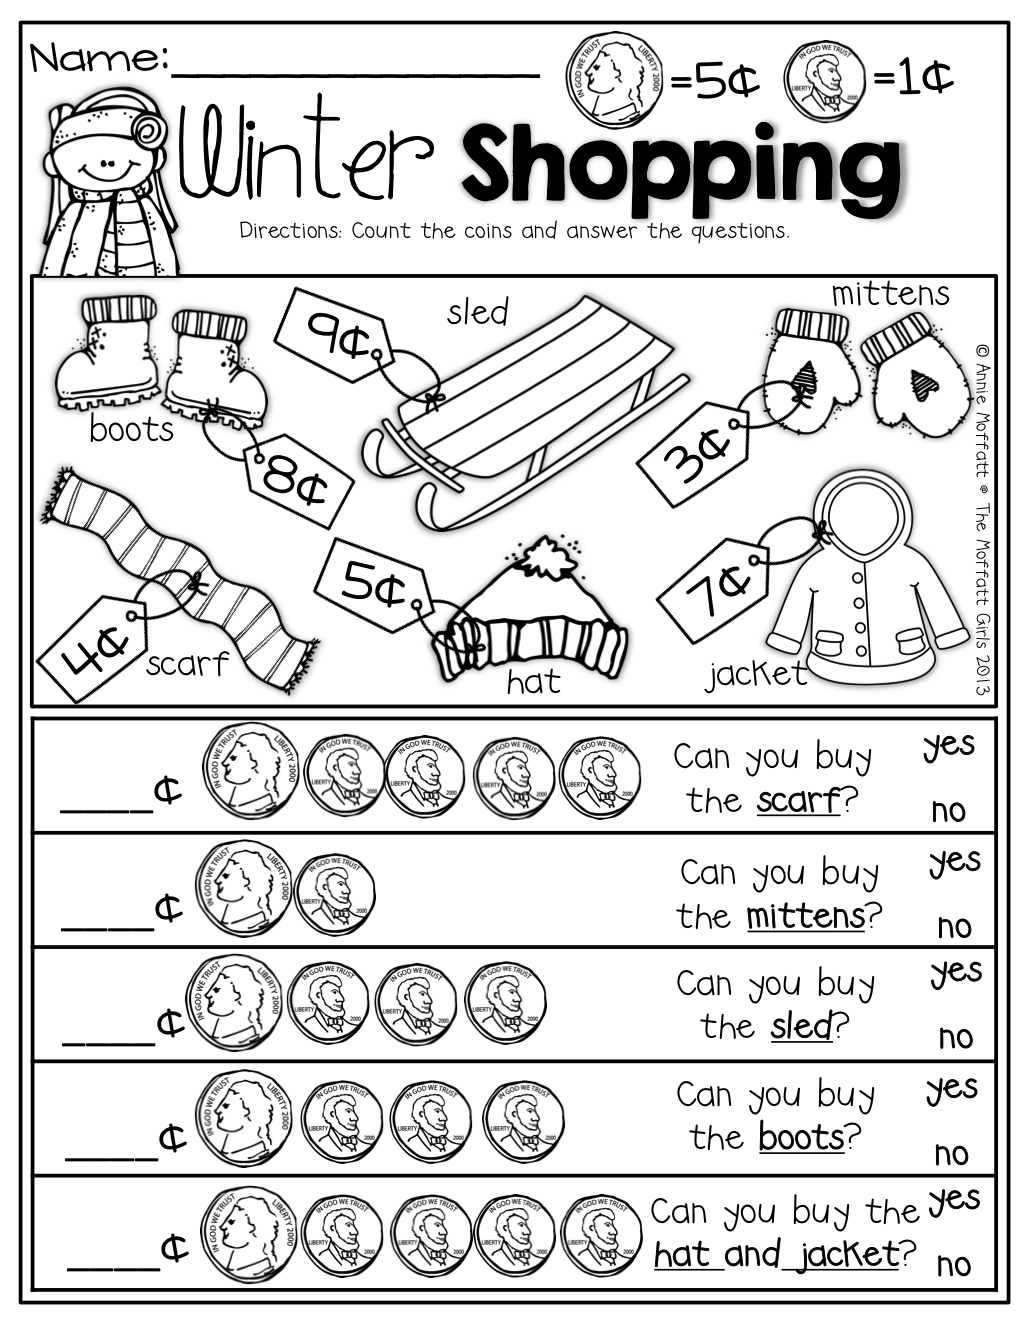 Winter Shopping With Nickels And Pennies! Prefect For Adding